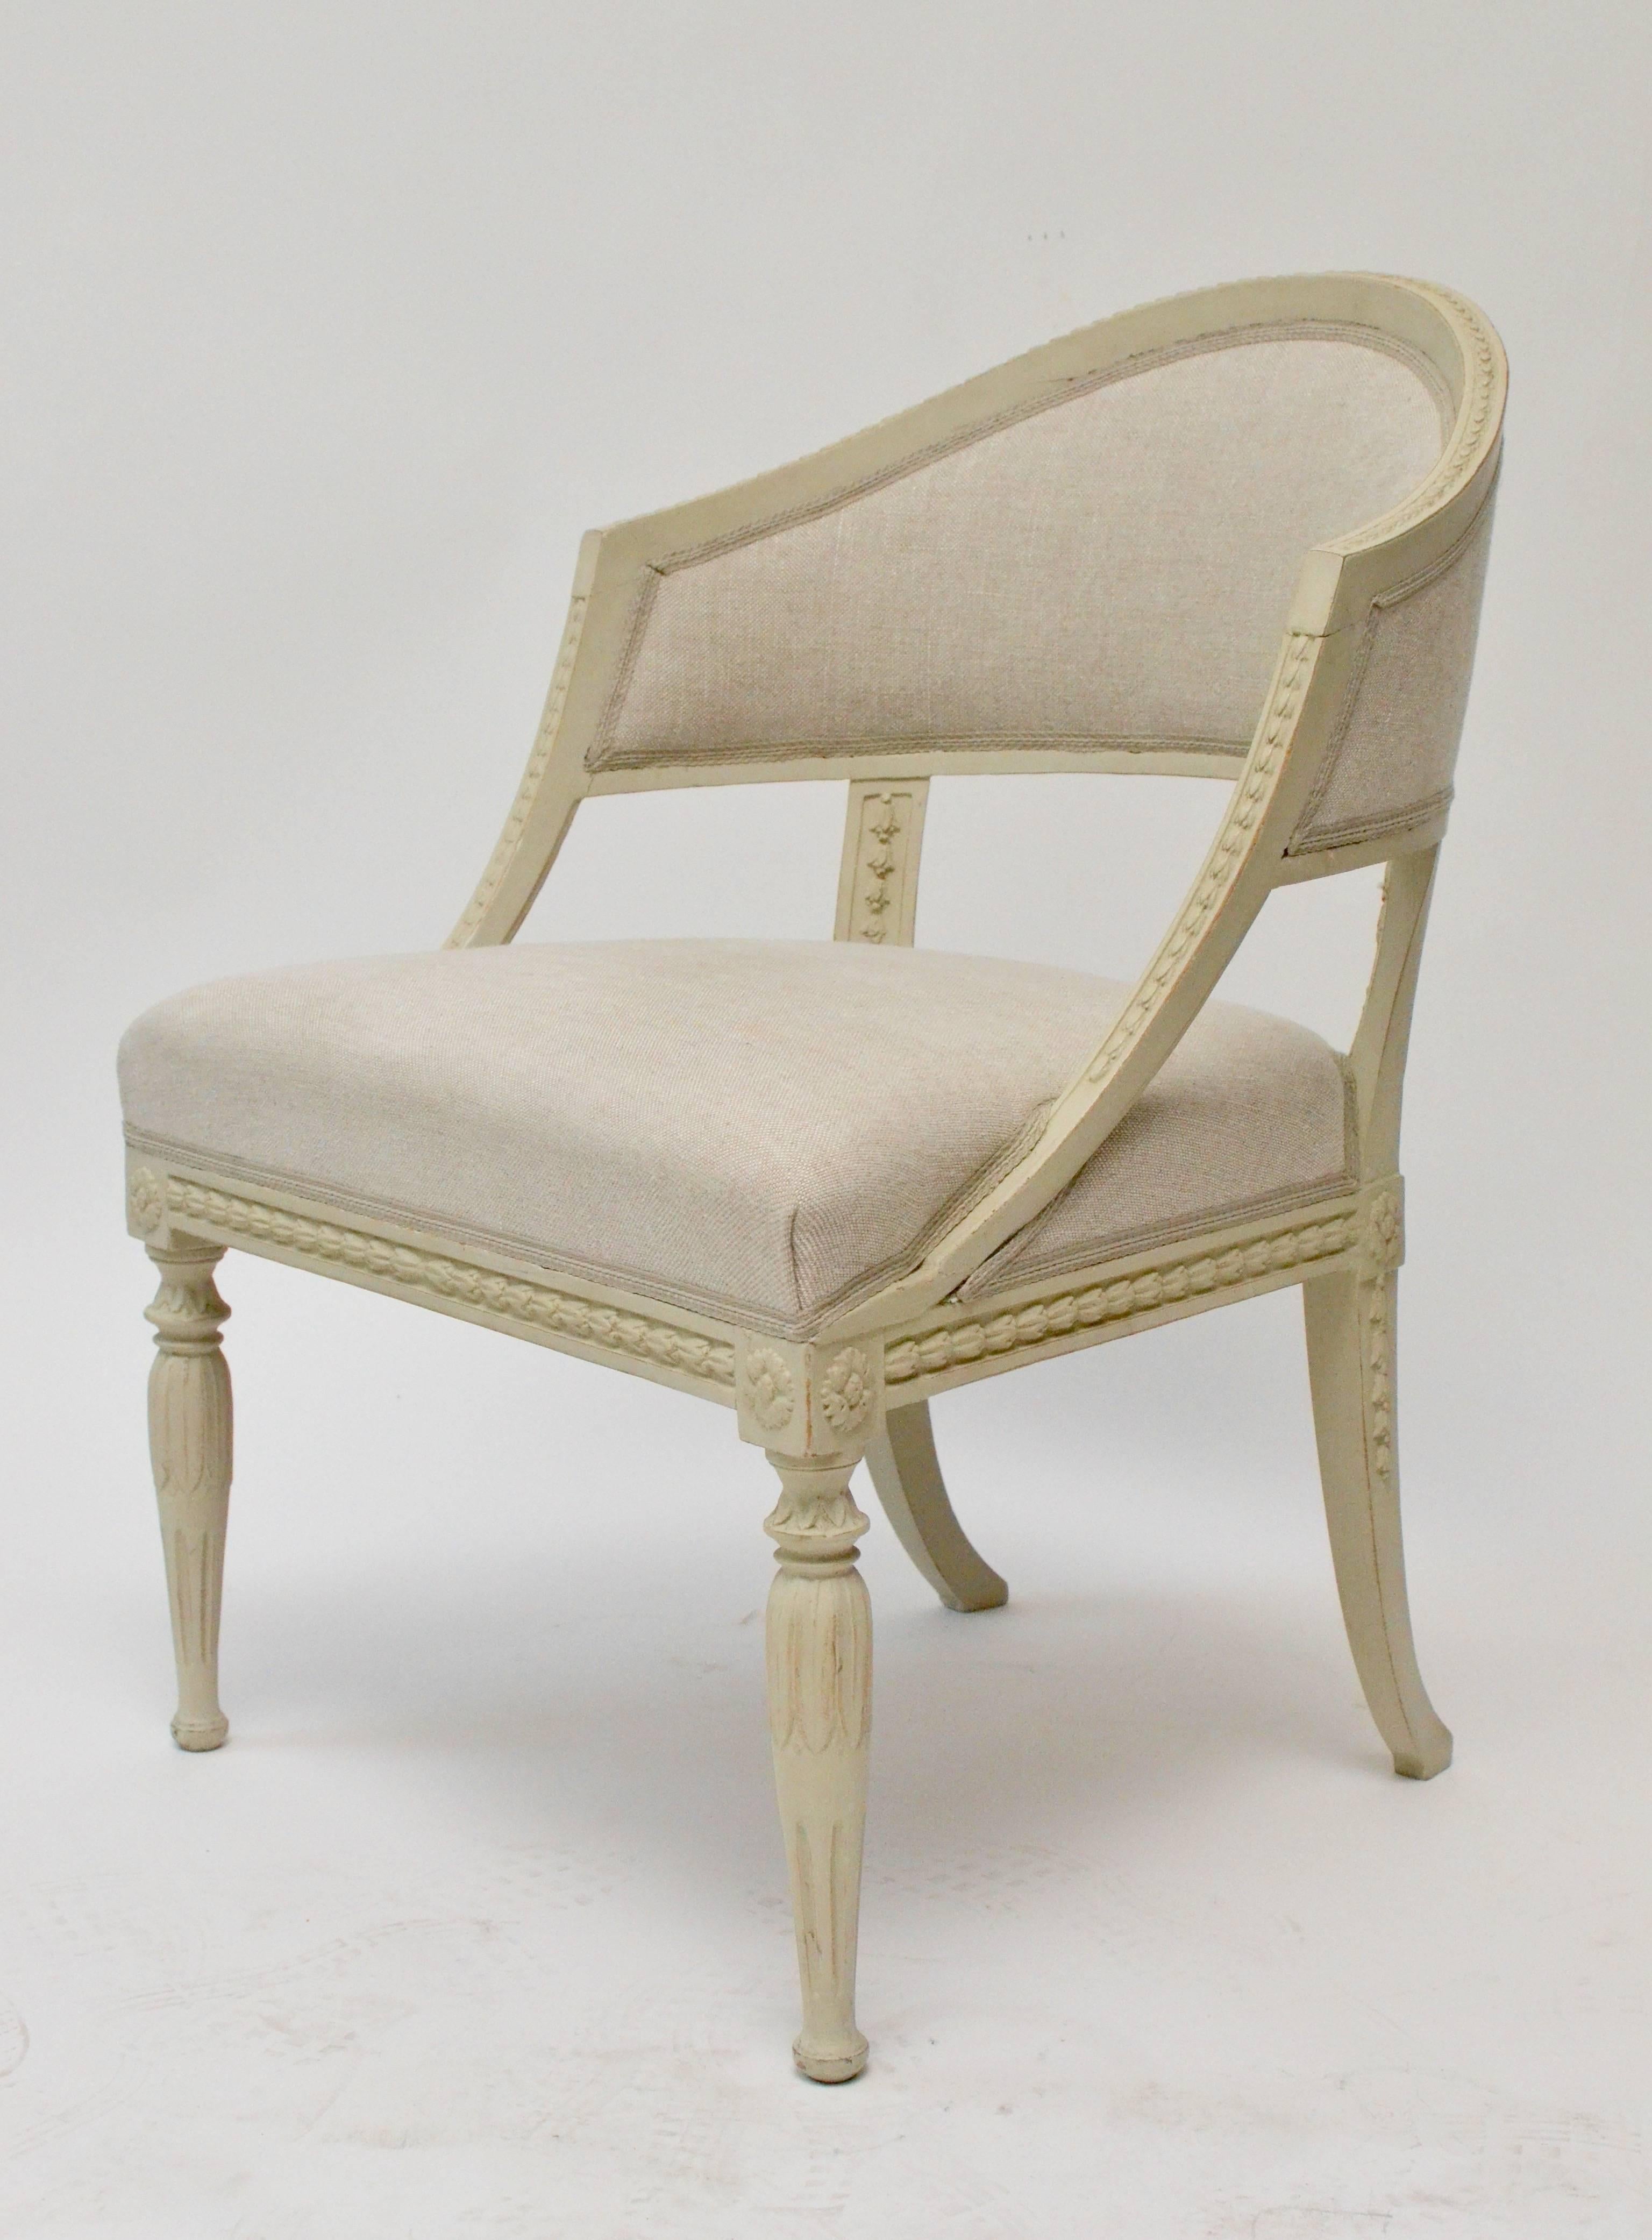 Painted Pair of Late Gustavian Swedish Armchairs Attributed to Ephraim Stahl, circa 1800